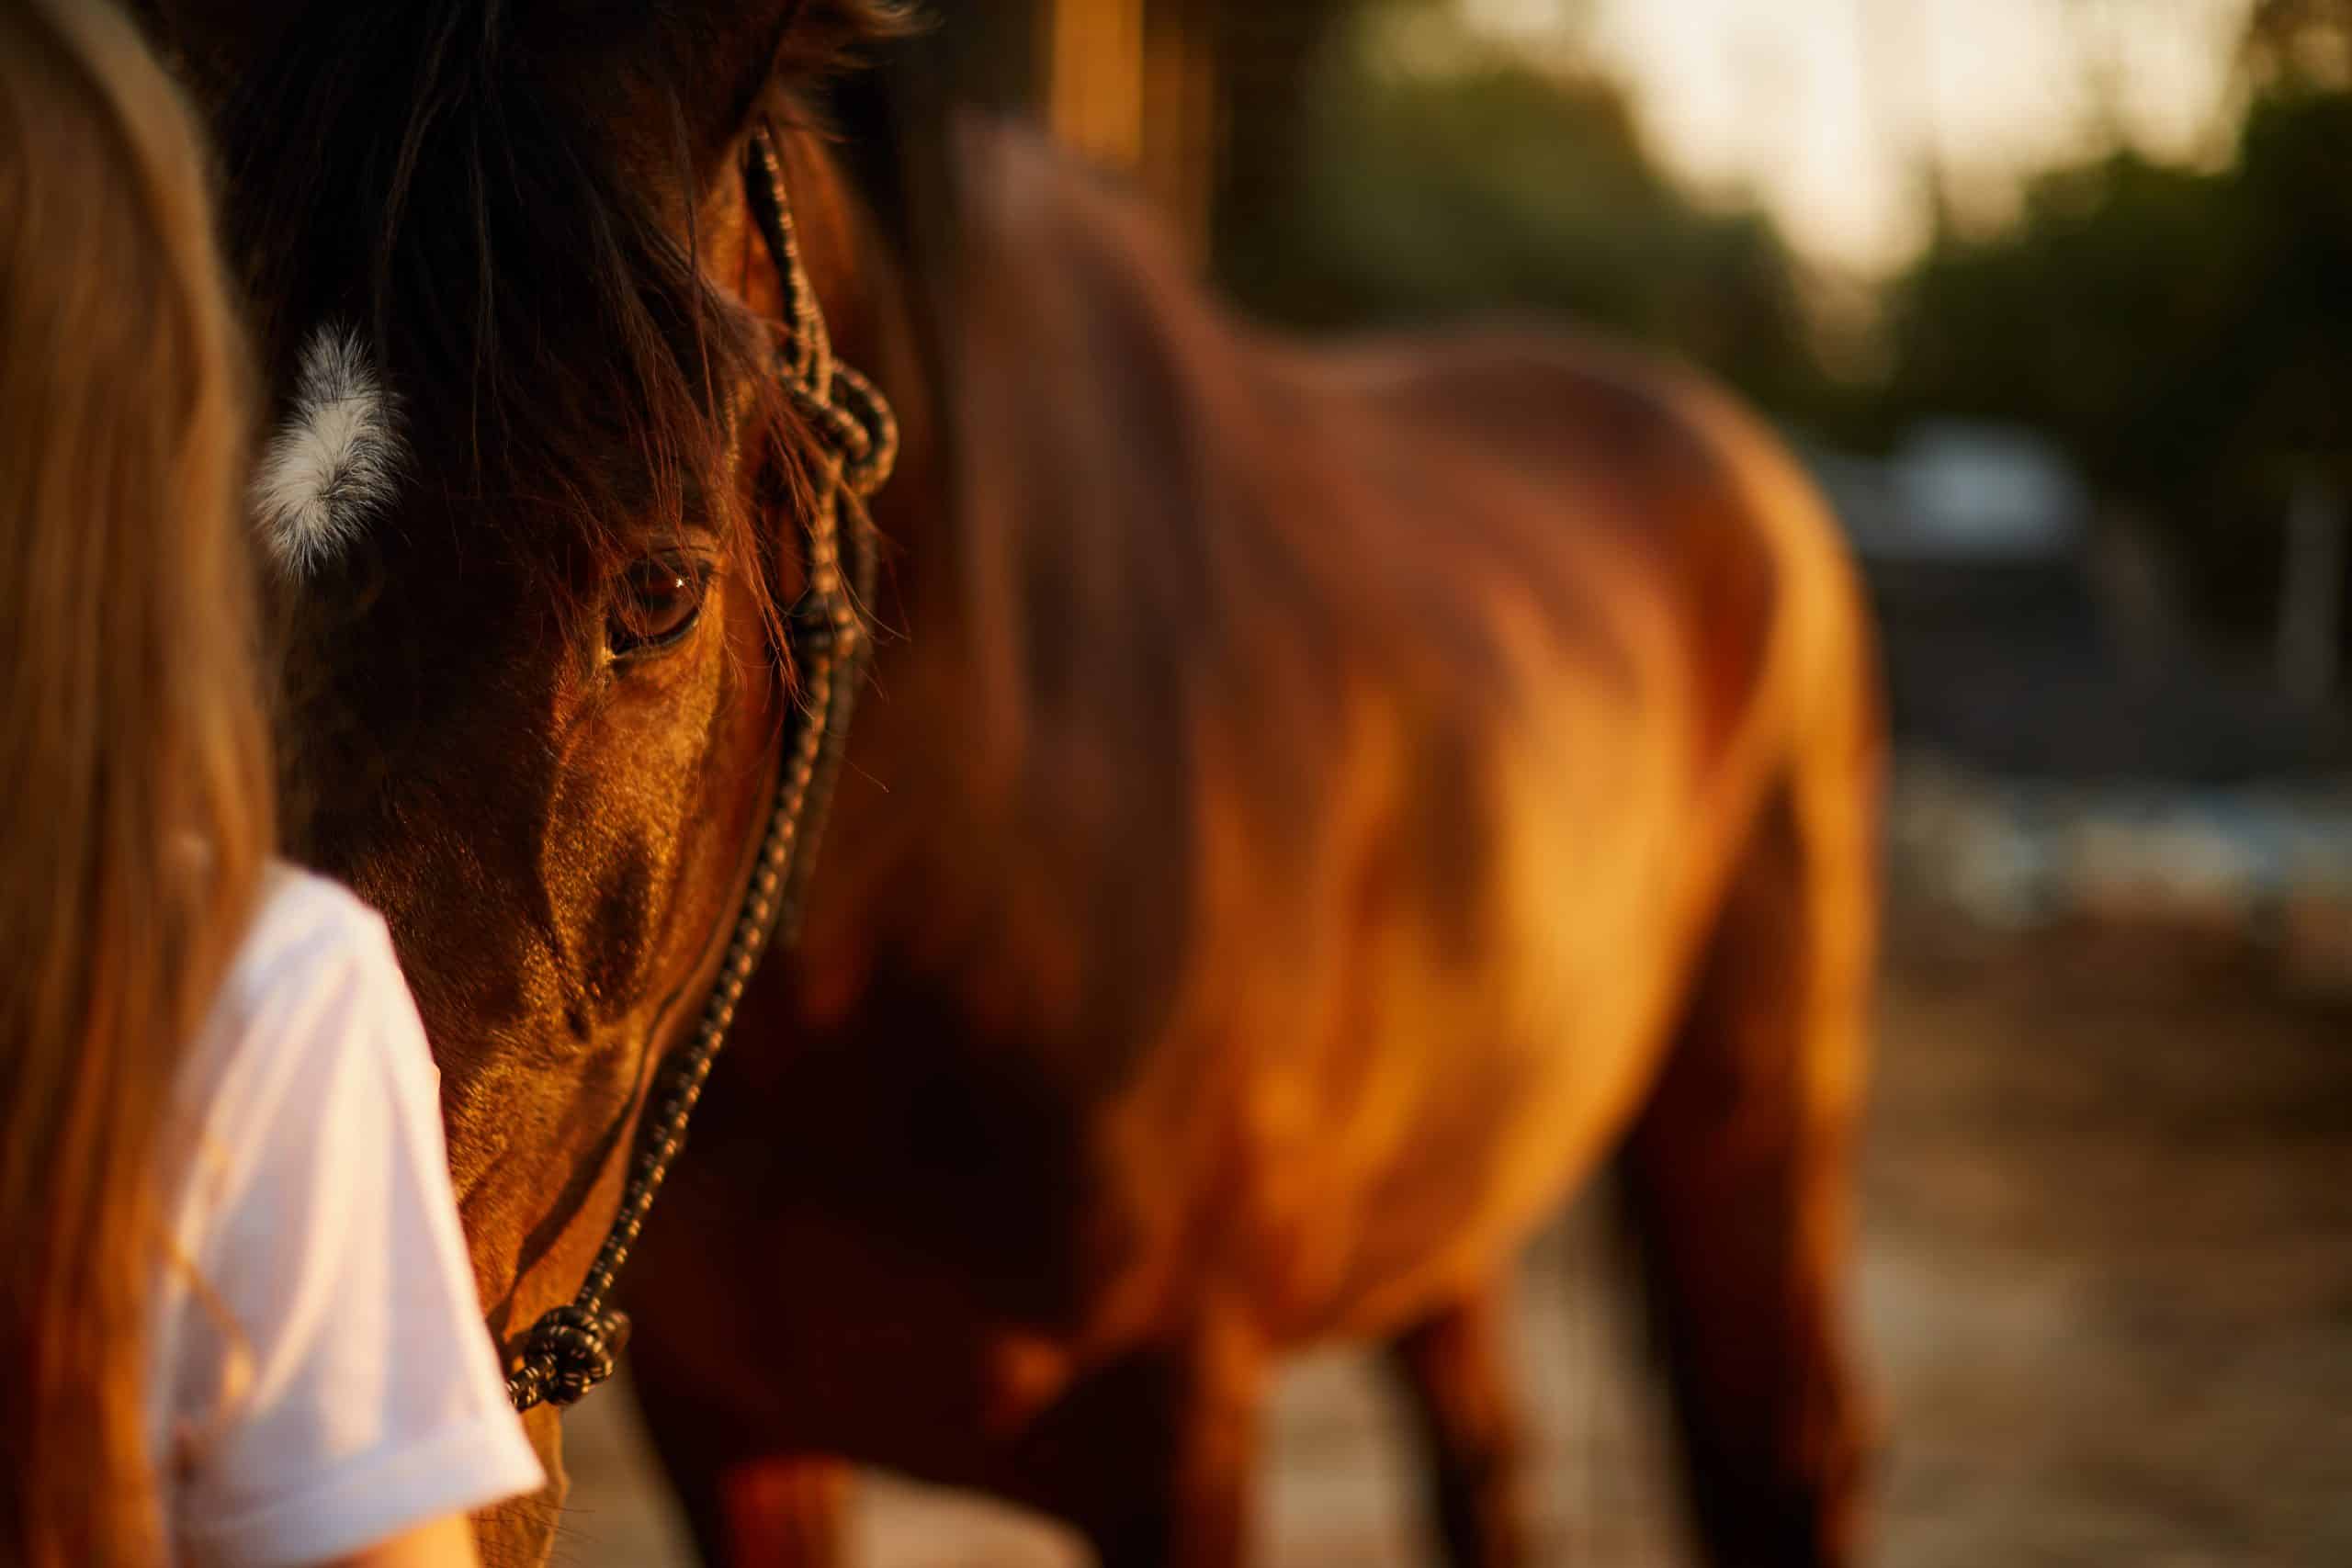 The girl looks into the eyes of a beautiful horse